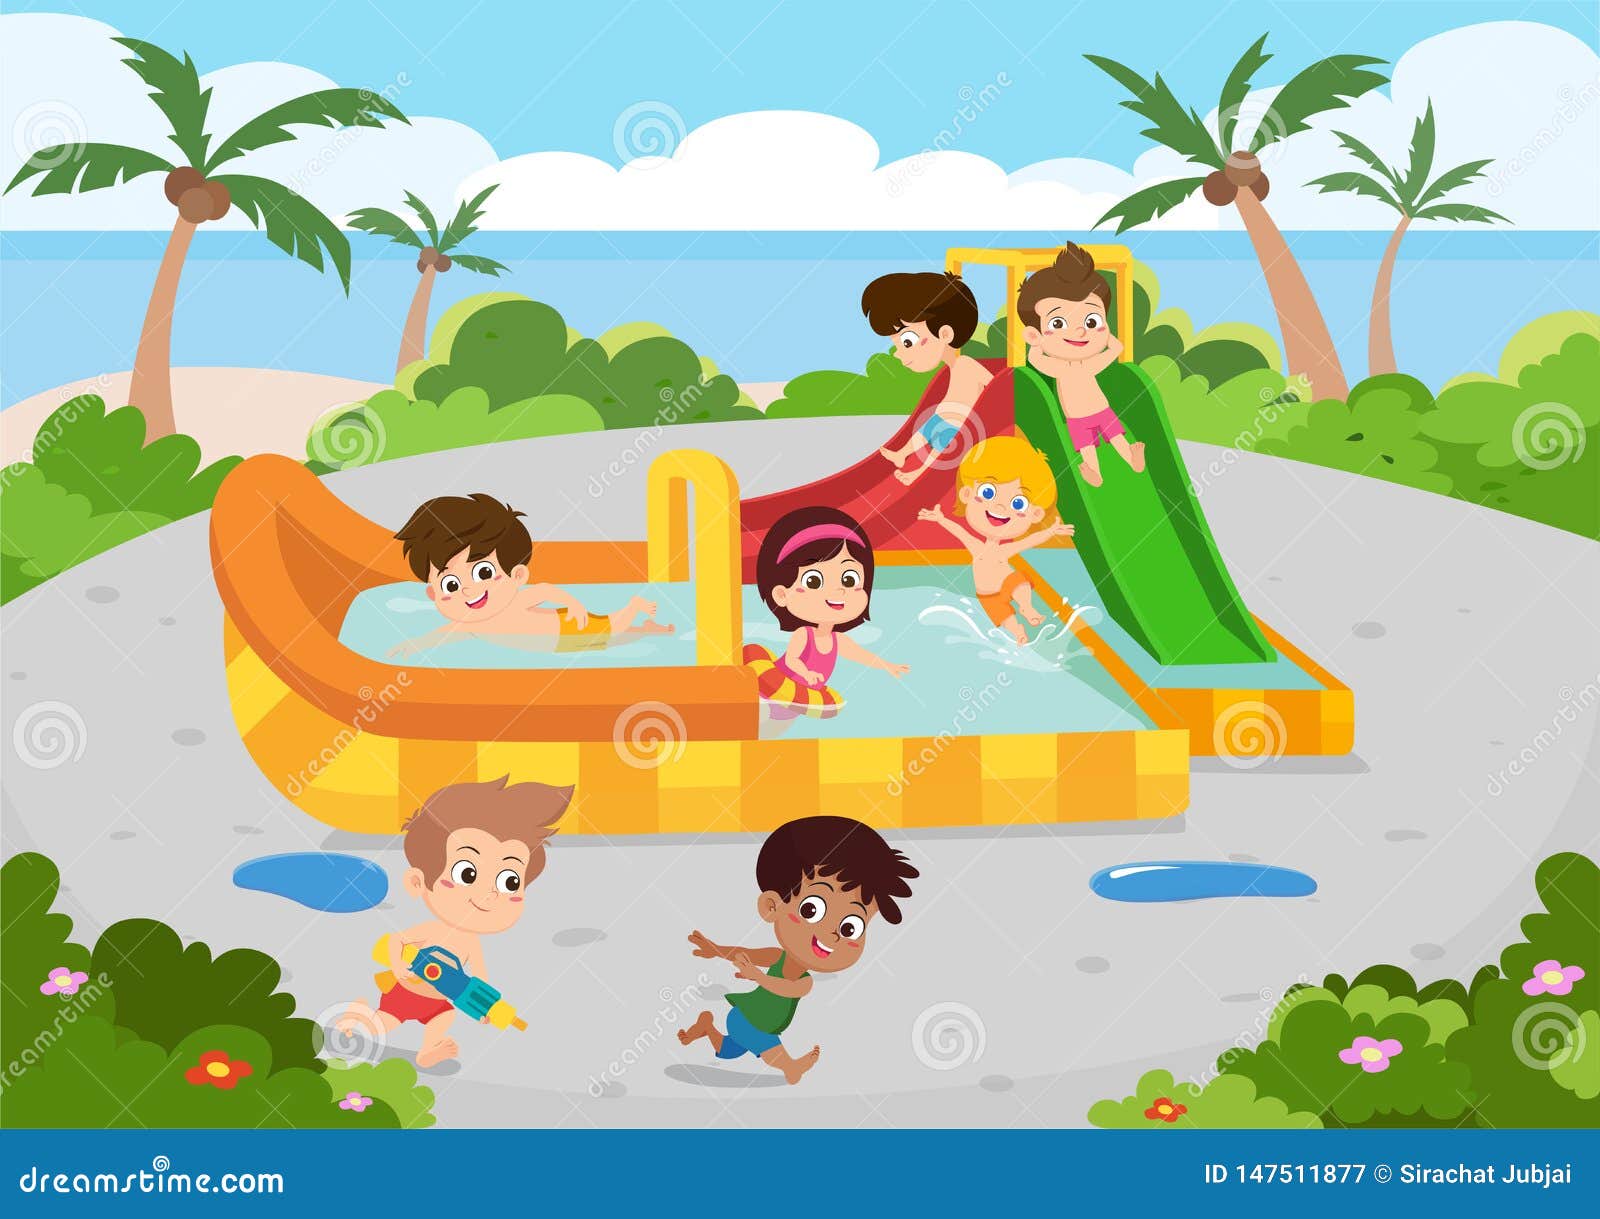 Download In The Morning,The Best Summer Child`s Outdoor Activities On The Beach.Vector And Illustration ...